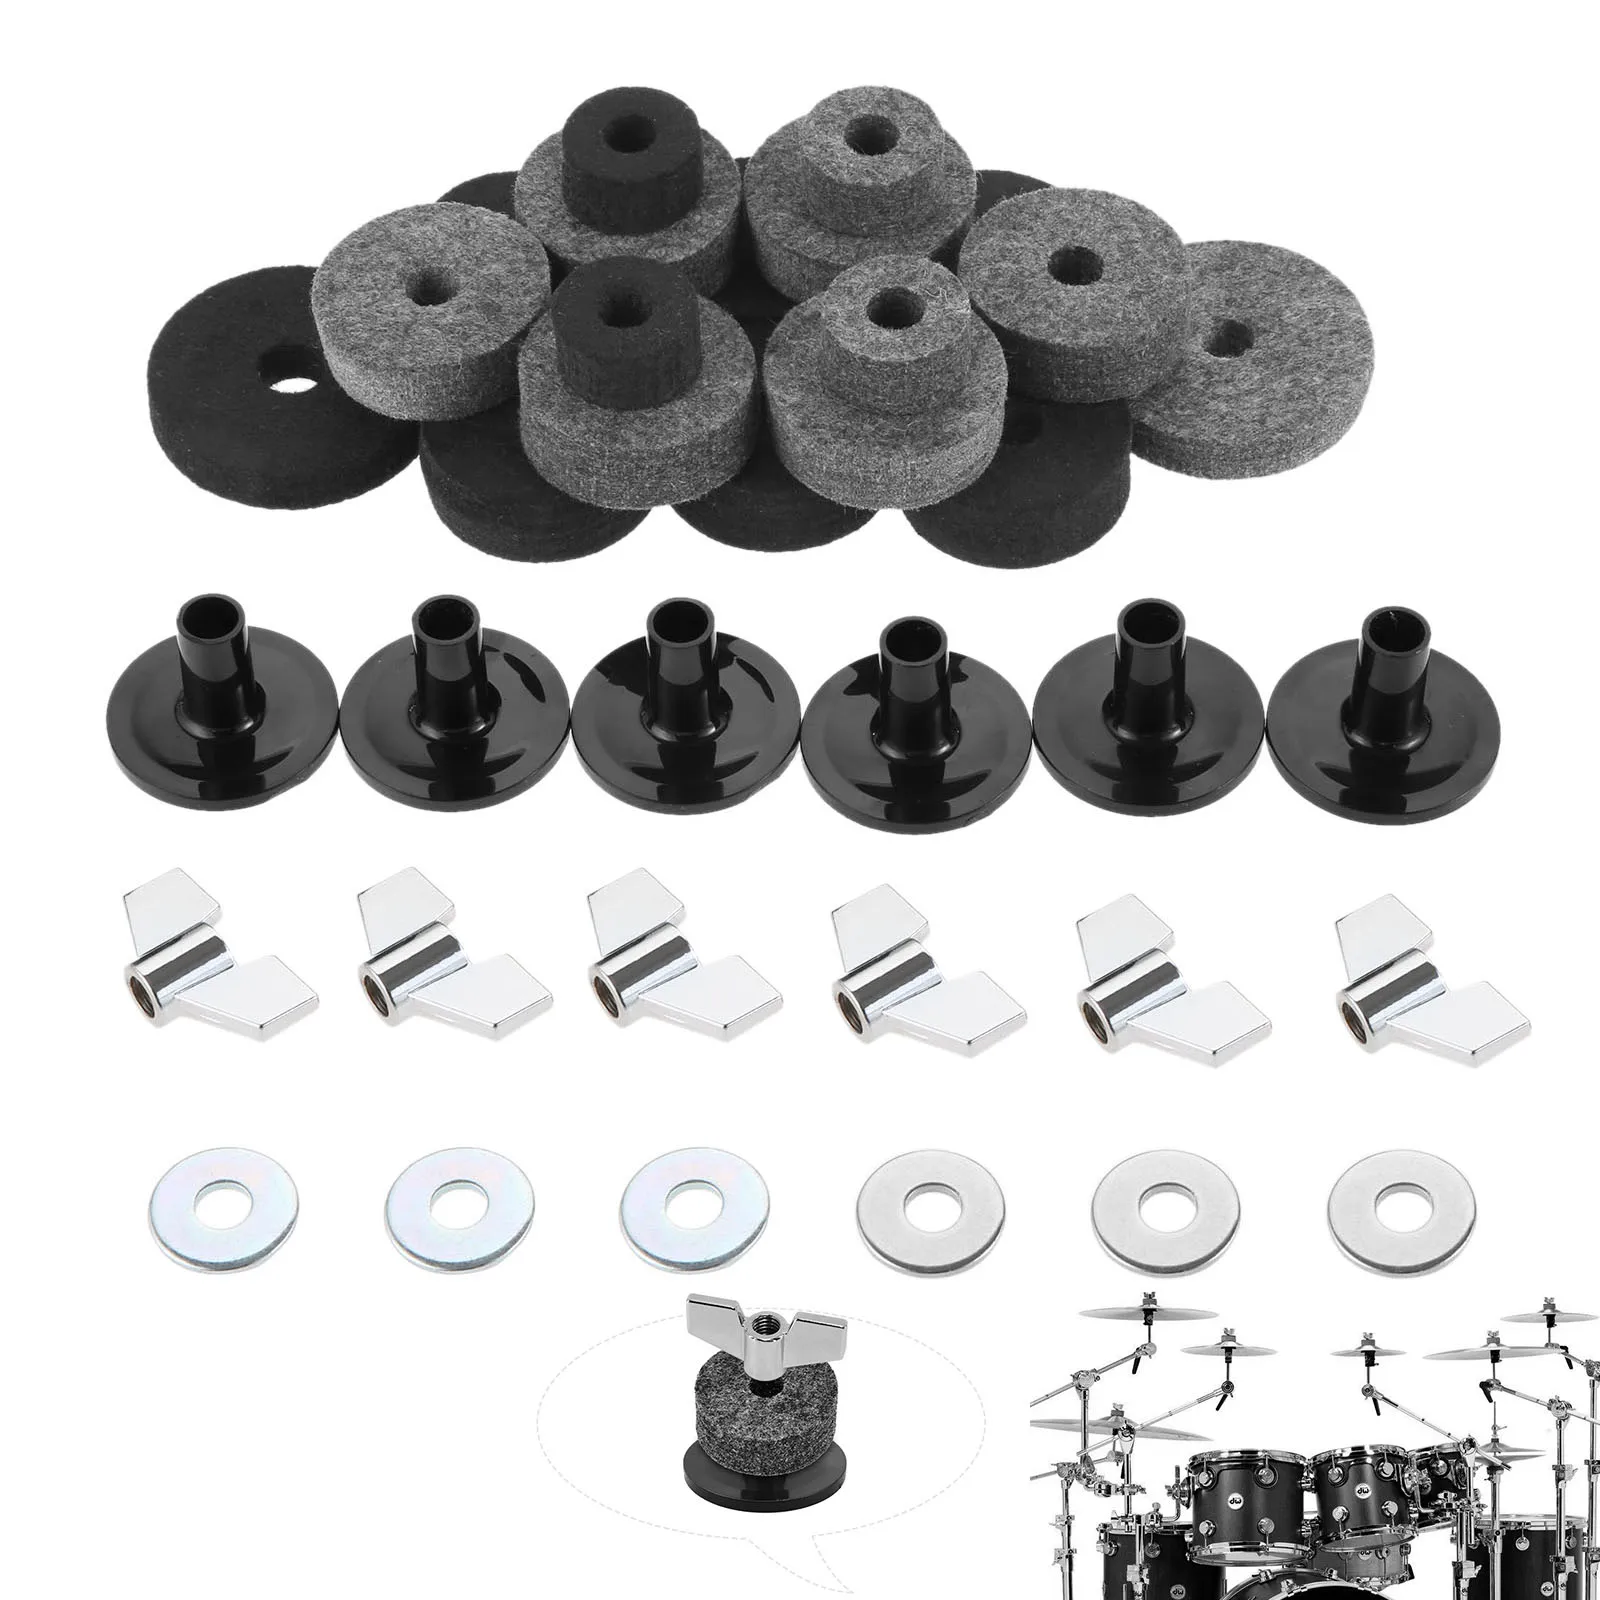 

Accessories 18pcs Washers Washer Drum Hat Felts Base Clutch Nut Wing Nuts Cymbal Stand Felt Set For Drum Sleeves High